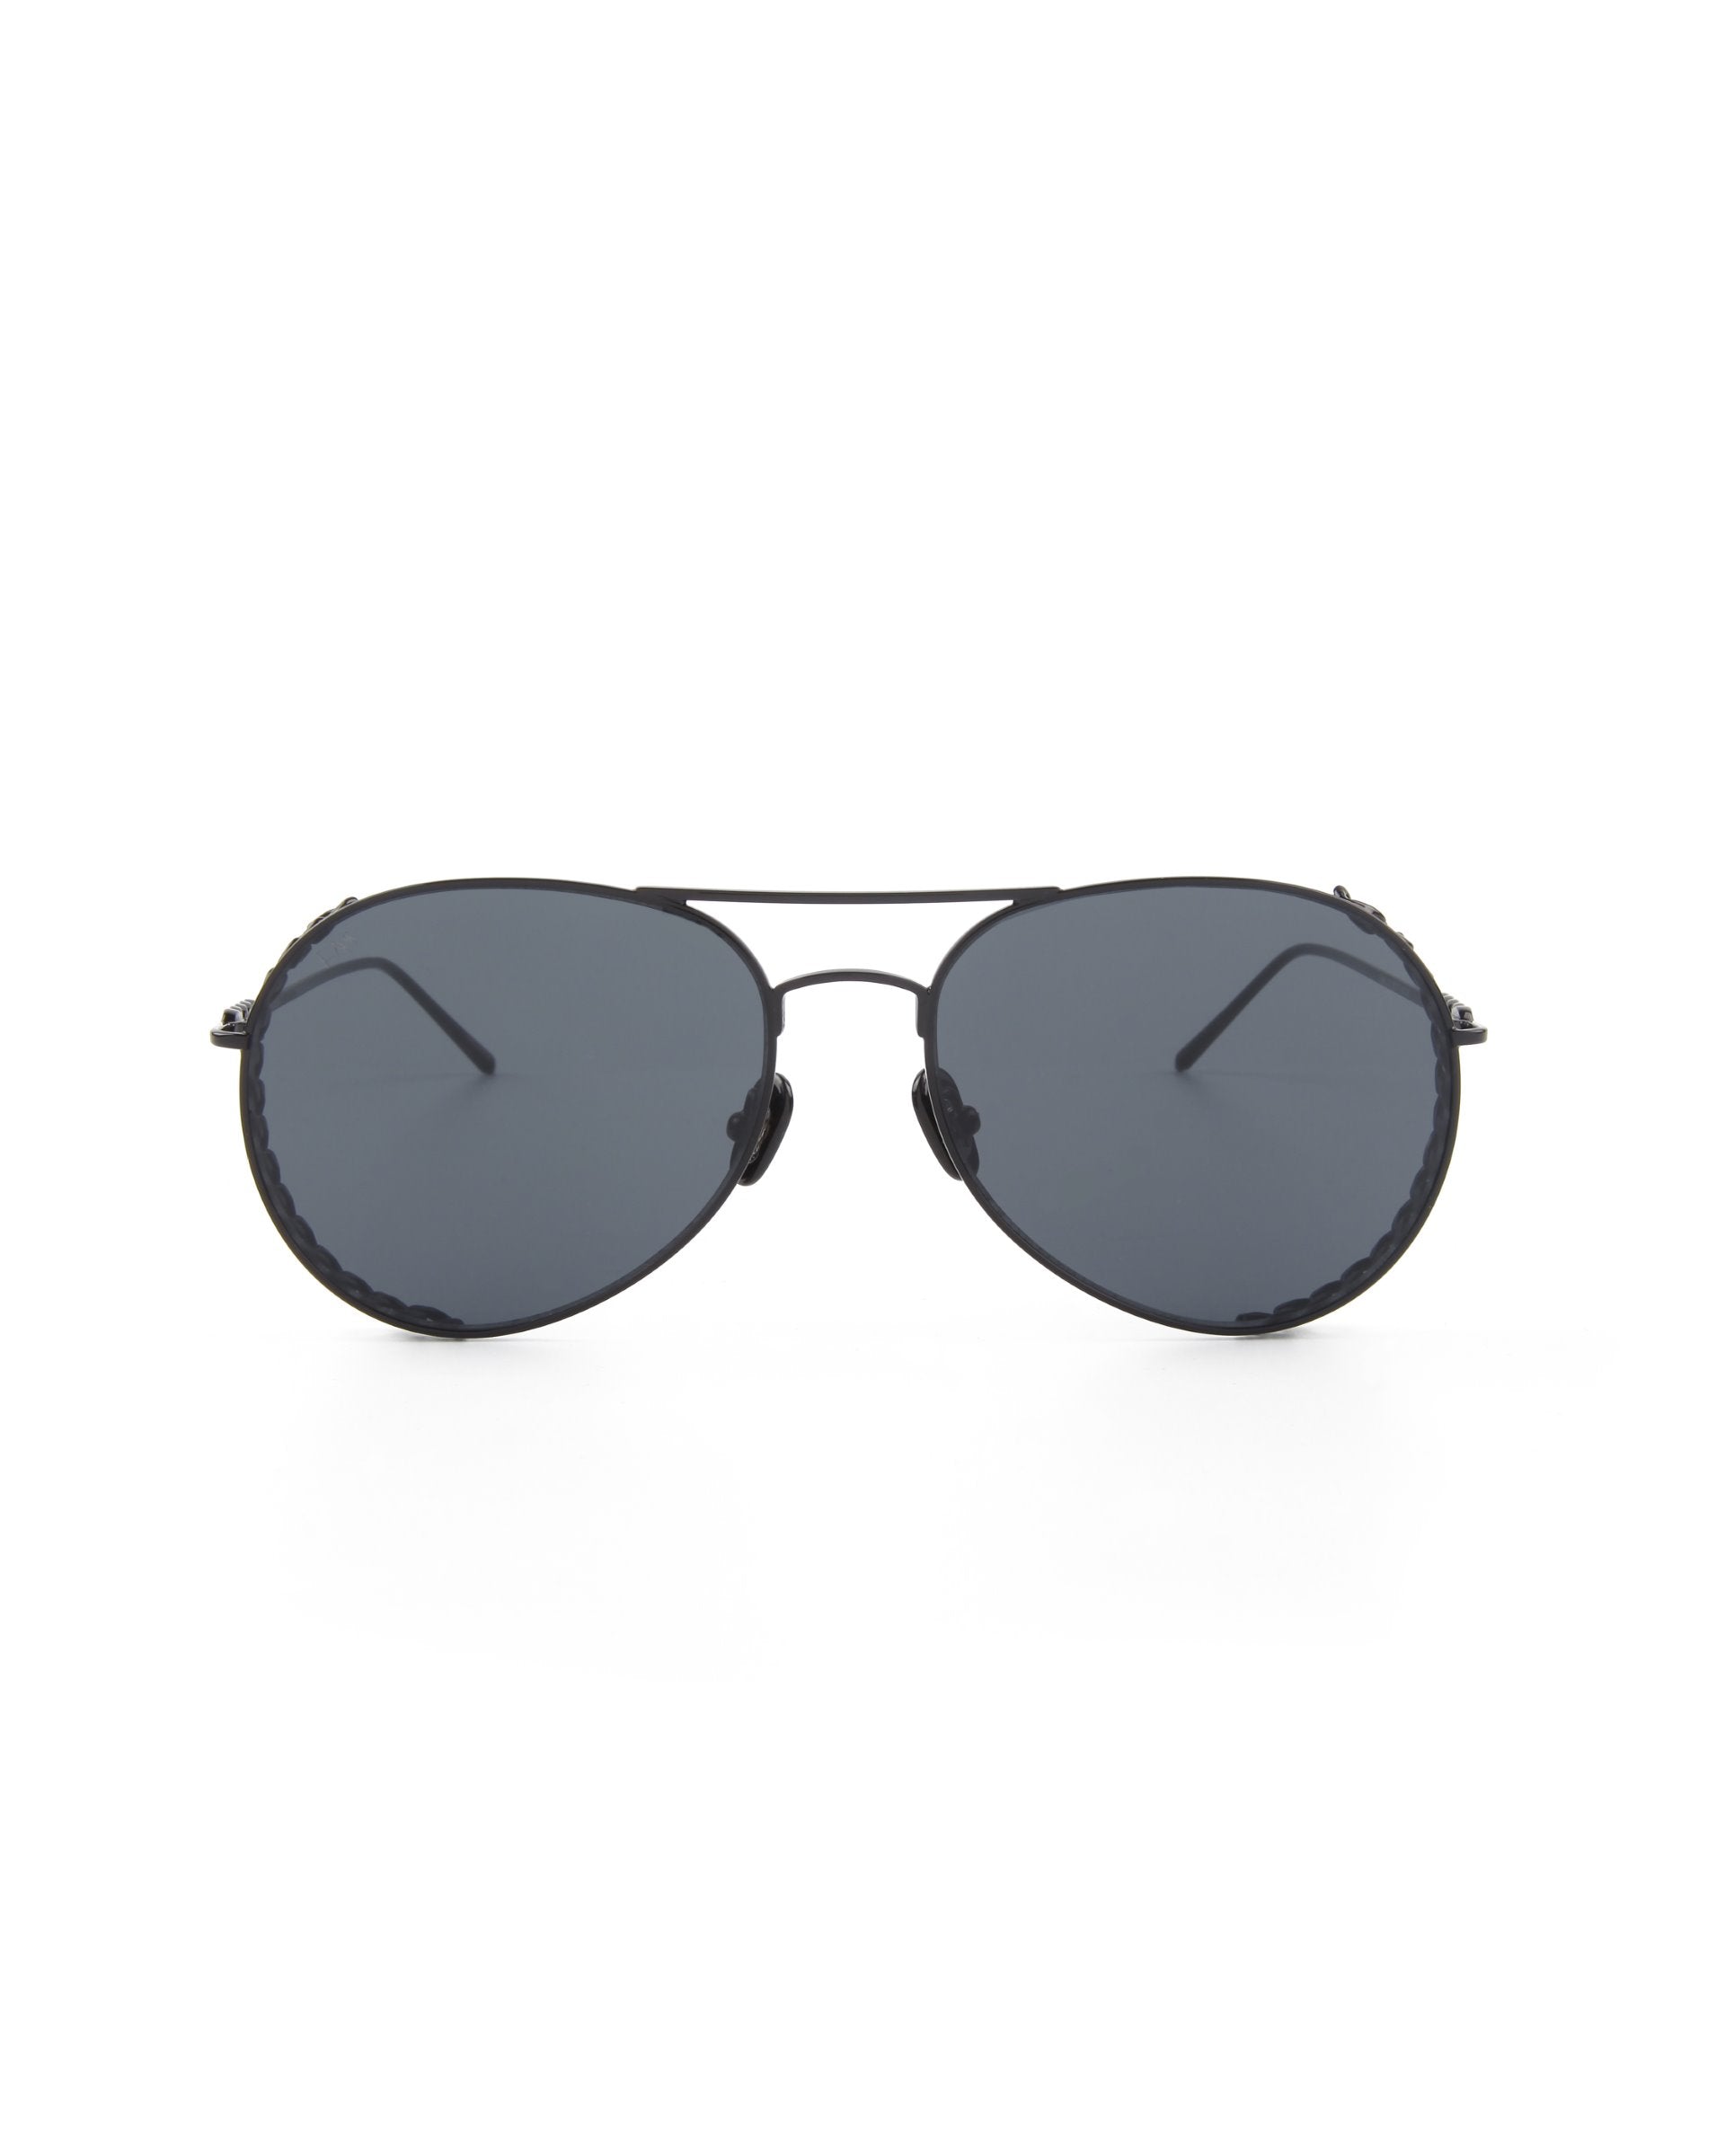 A pair of For Art's Sake® Links sunglasses with slightly convex nylon lenses and a sleek black metal frame. The sunglasses feature gold plated stainless steel temples and an adjustable nose bridge, designed for a classic and stylish look that enhances the traditional aviator style.